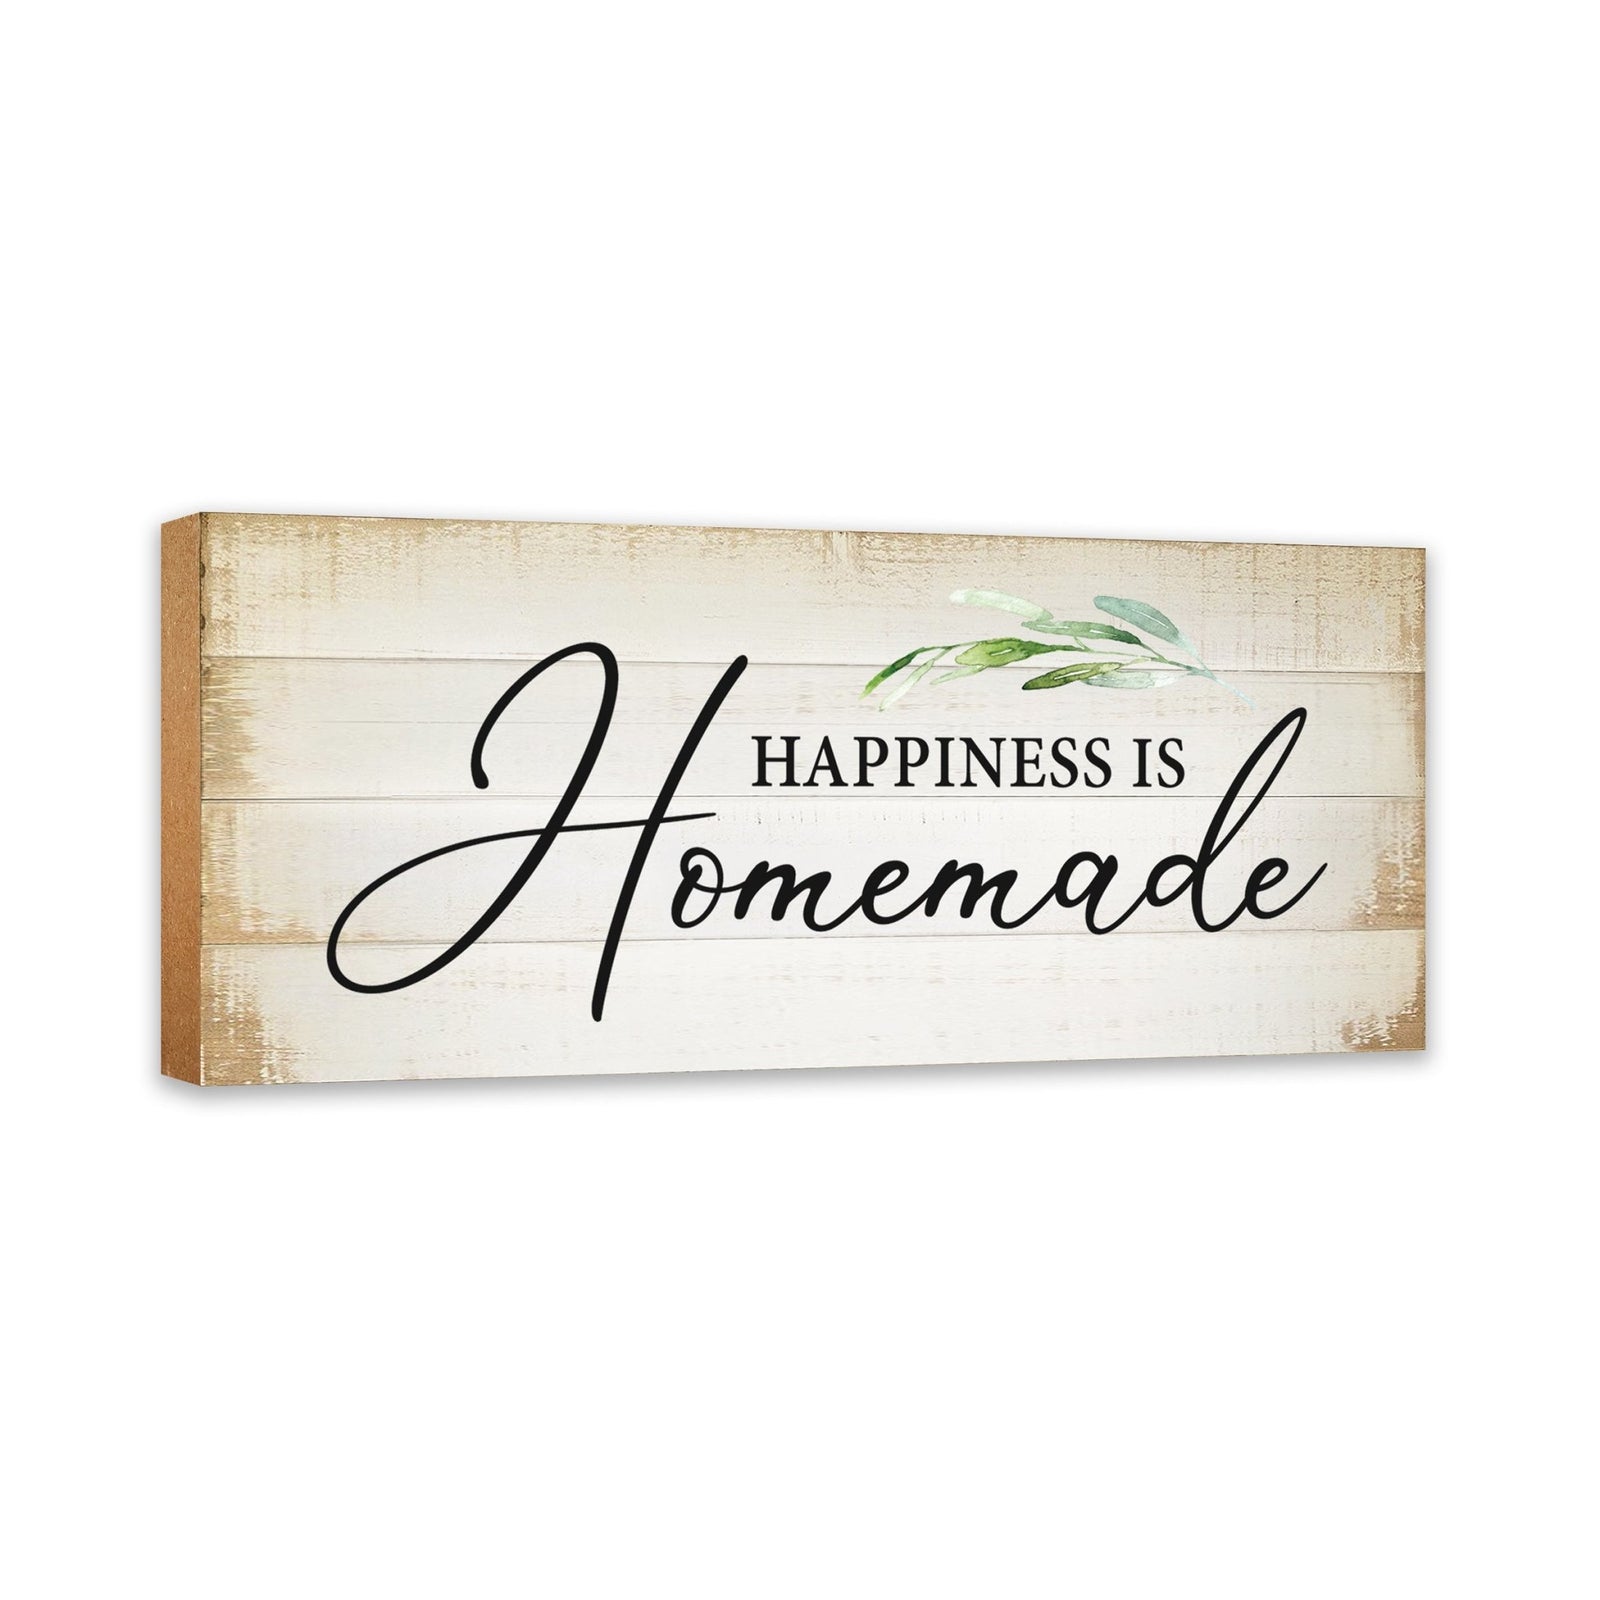 Inspirational Wooden Wall Hanging Plaque Kitchen Home Décor For All Season Decoration Happiness Is Homemade (Leaf)